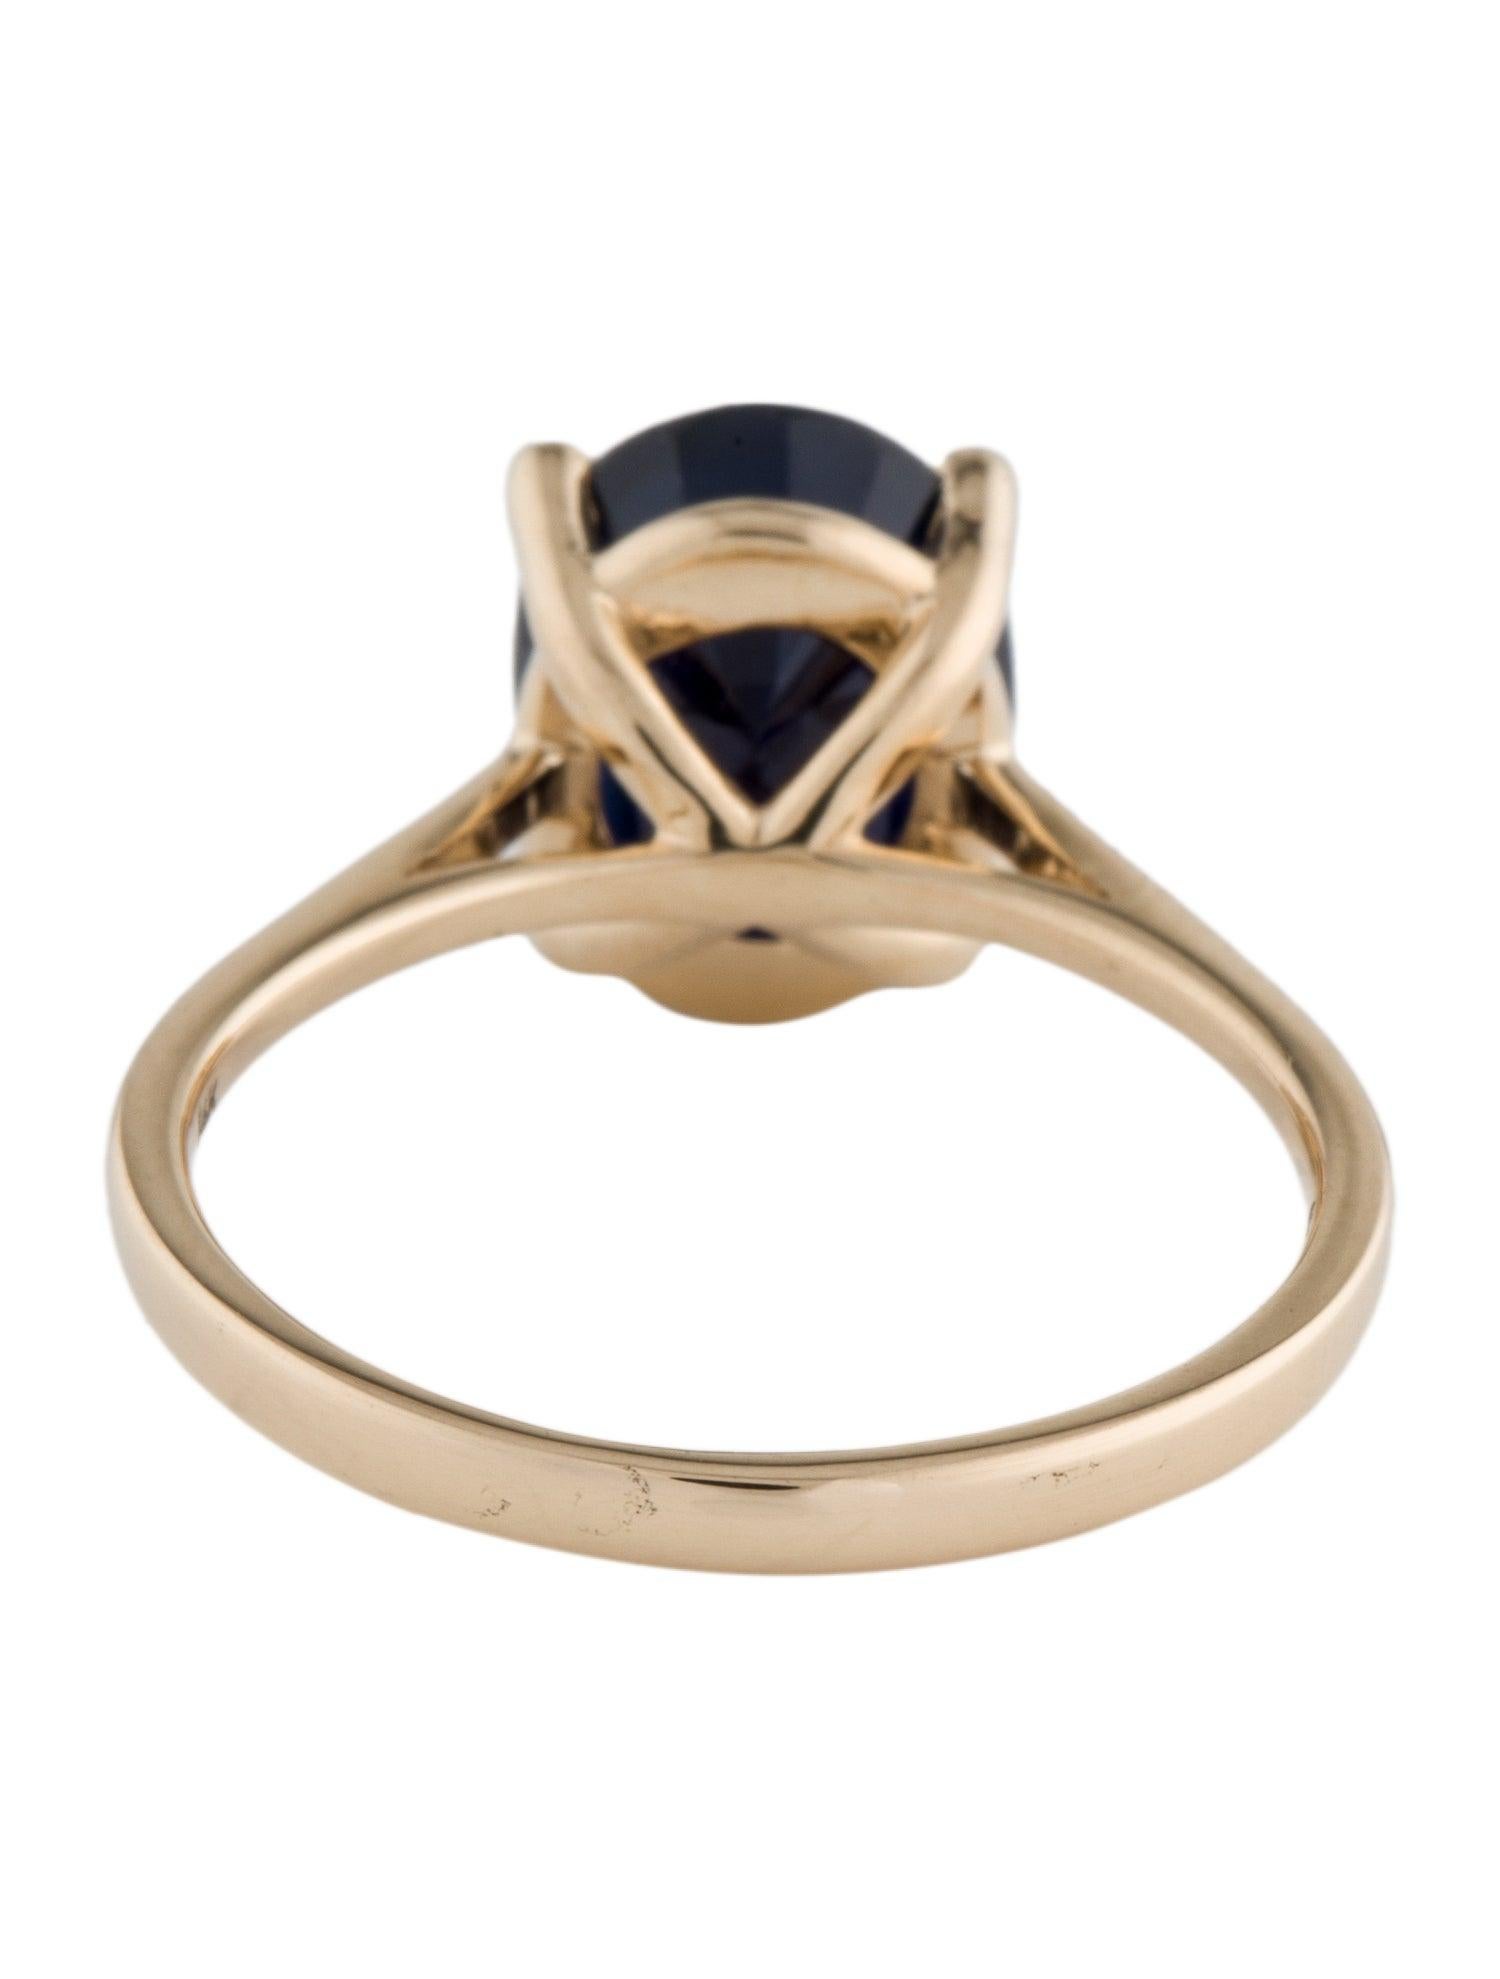 Brilliant Cut Dazzling 14K Gold 2.99ct Sapphire Cocktail Ring - Size 6.75 - Statement Jewelry For Sale